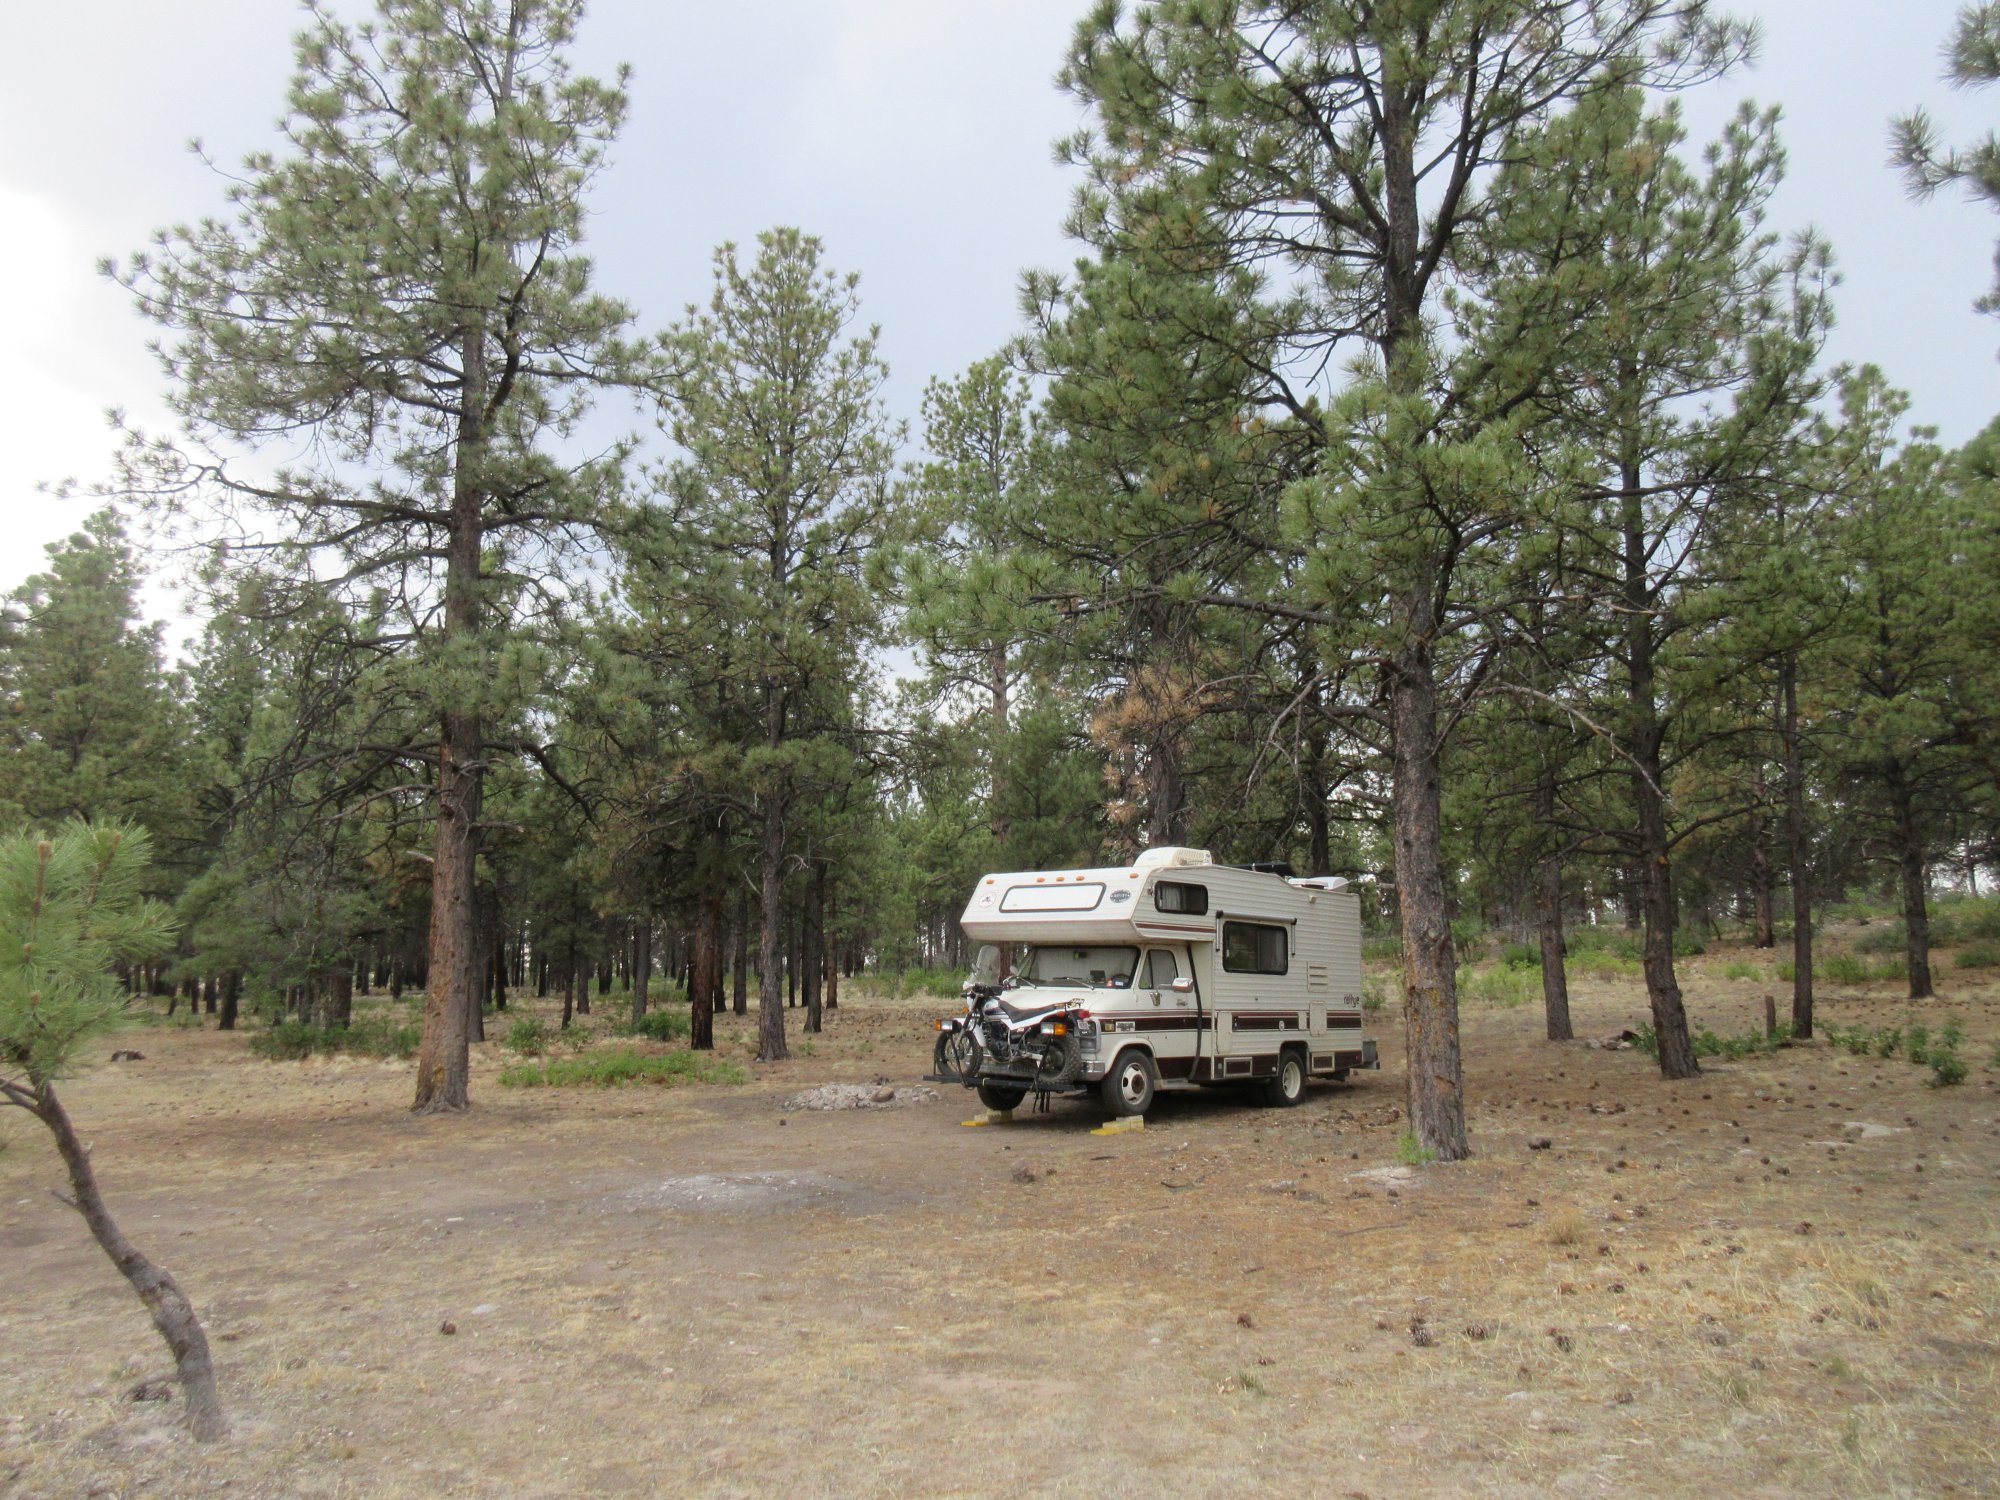 Protecting Our Public Lands: Escapees RV Club’s RVers Boondocking Policy 4